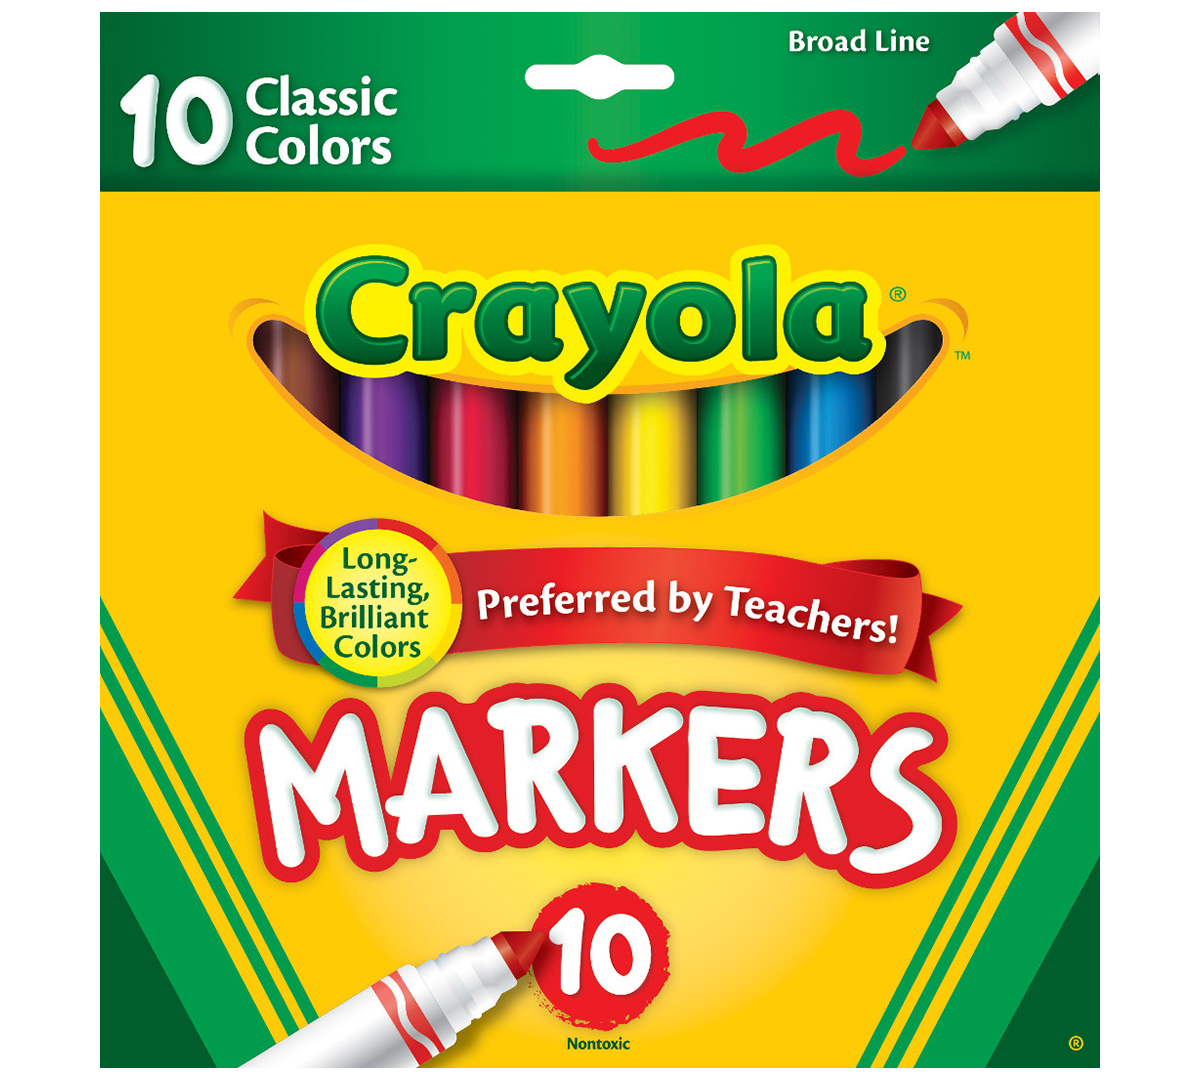 Crayola Assorted Crayons 24ct : Home & Office fast delivery by App